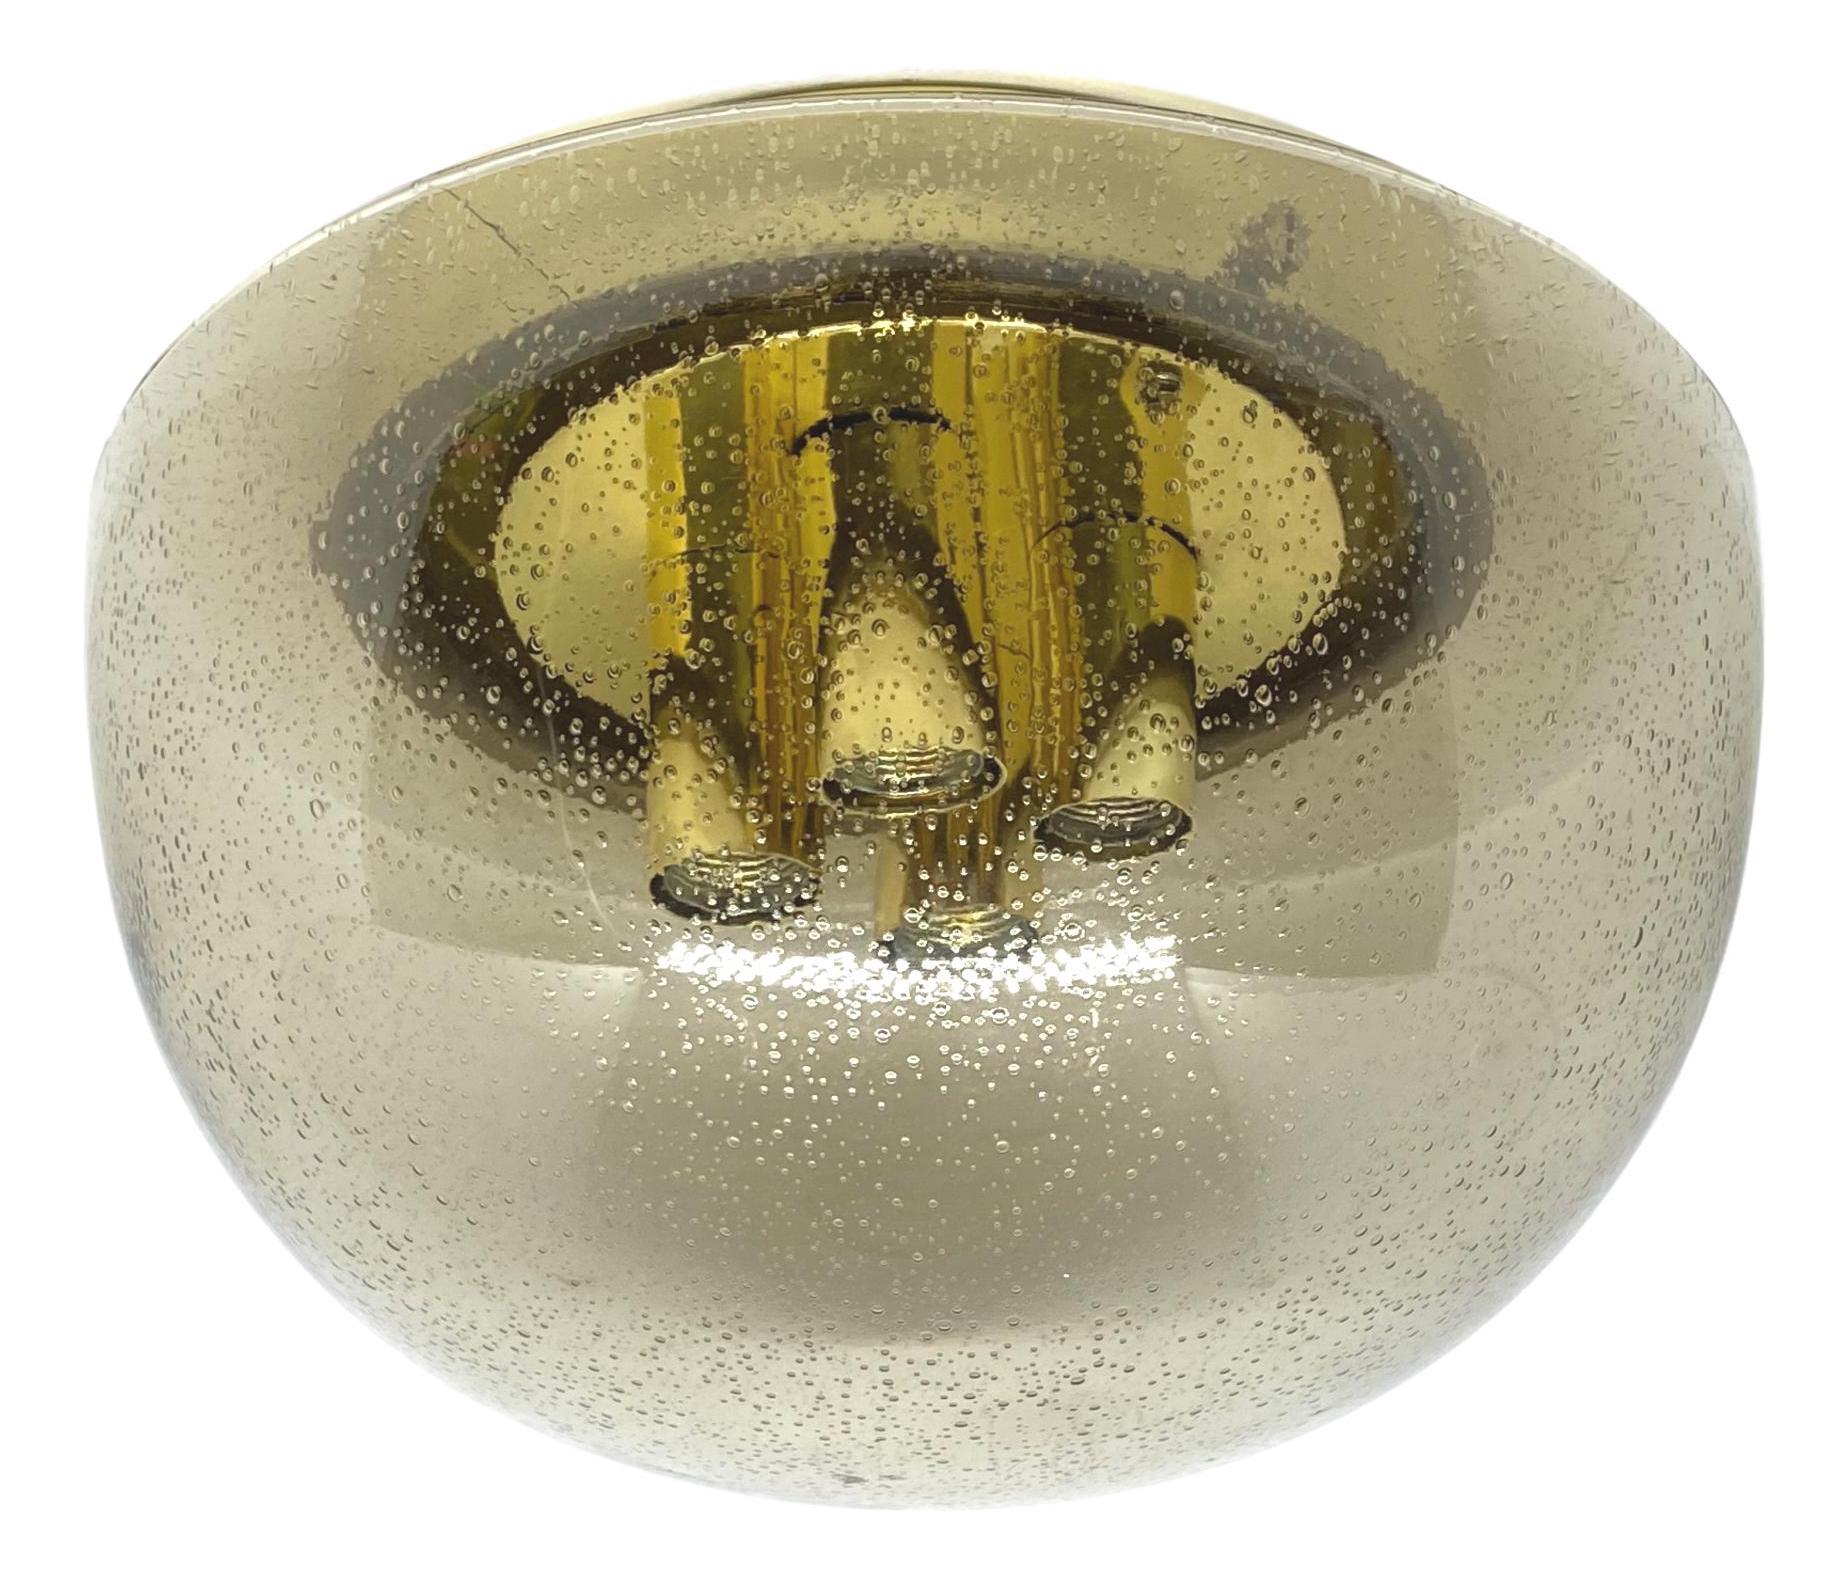 A beautiful large flush mount by German manufacturer Glashuette Limburg. The large bubble glass element is supported by a polished brass plate with four light sources. Beautiful bubble glass on a metal fixture. The fixture requires four European E14